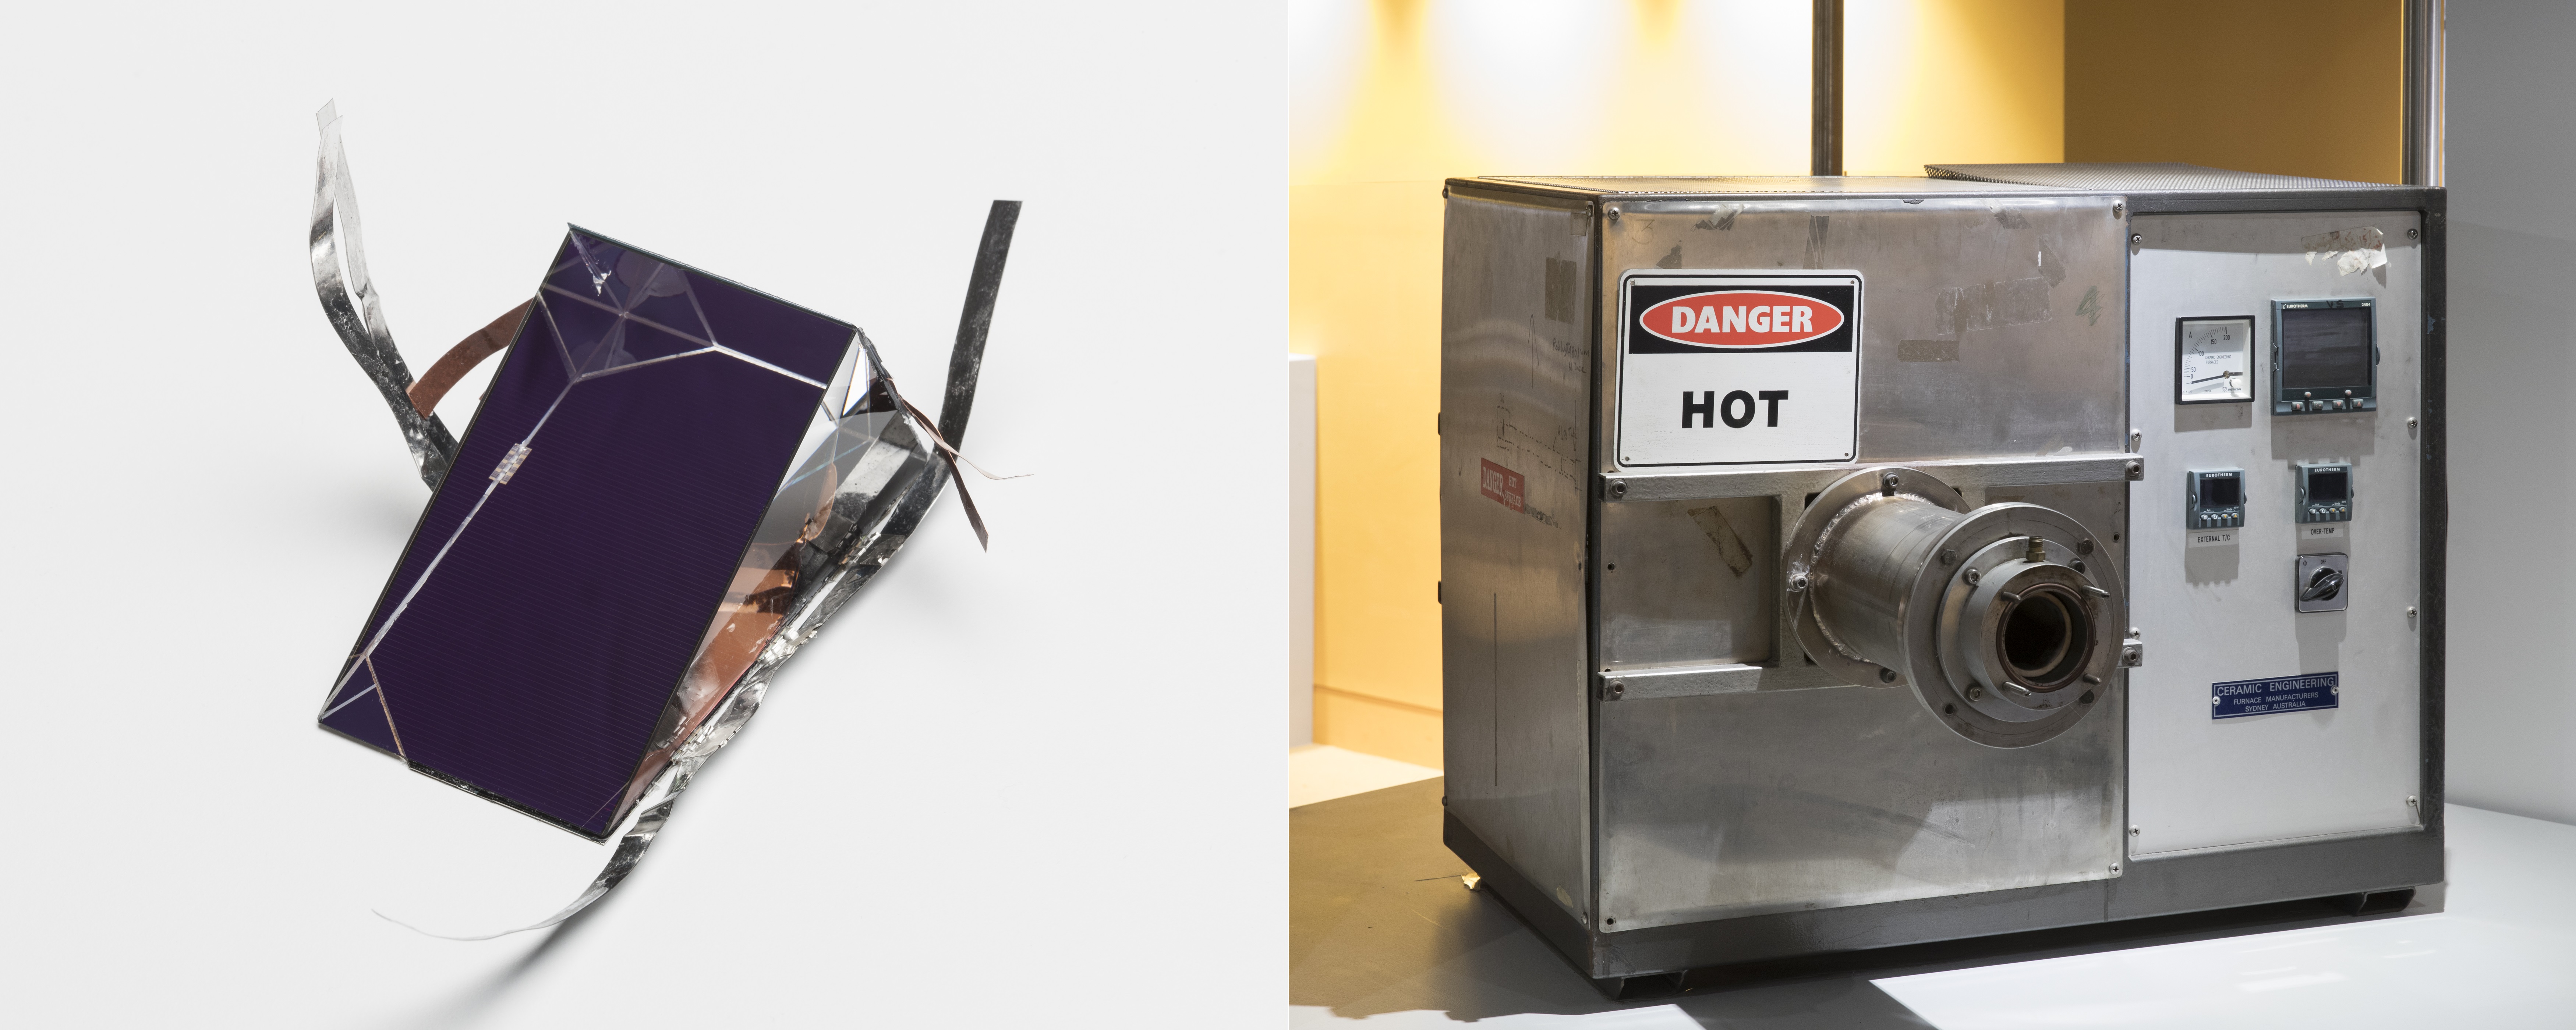 Two images side by side. Left: A glass prism to with are attached various strips of metal. Right: a rectangular metal box with 'Danger HOT' sign and various analogue and digital displays on the front. There is also a cylindrical metal 'pipe' protruding from the front of the furnace, through which materials can be fed.